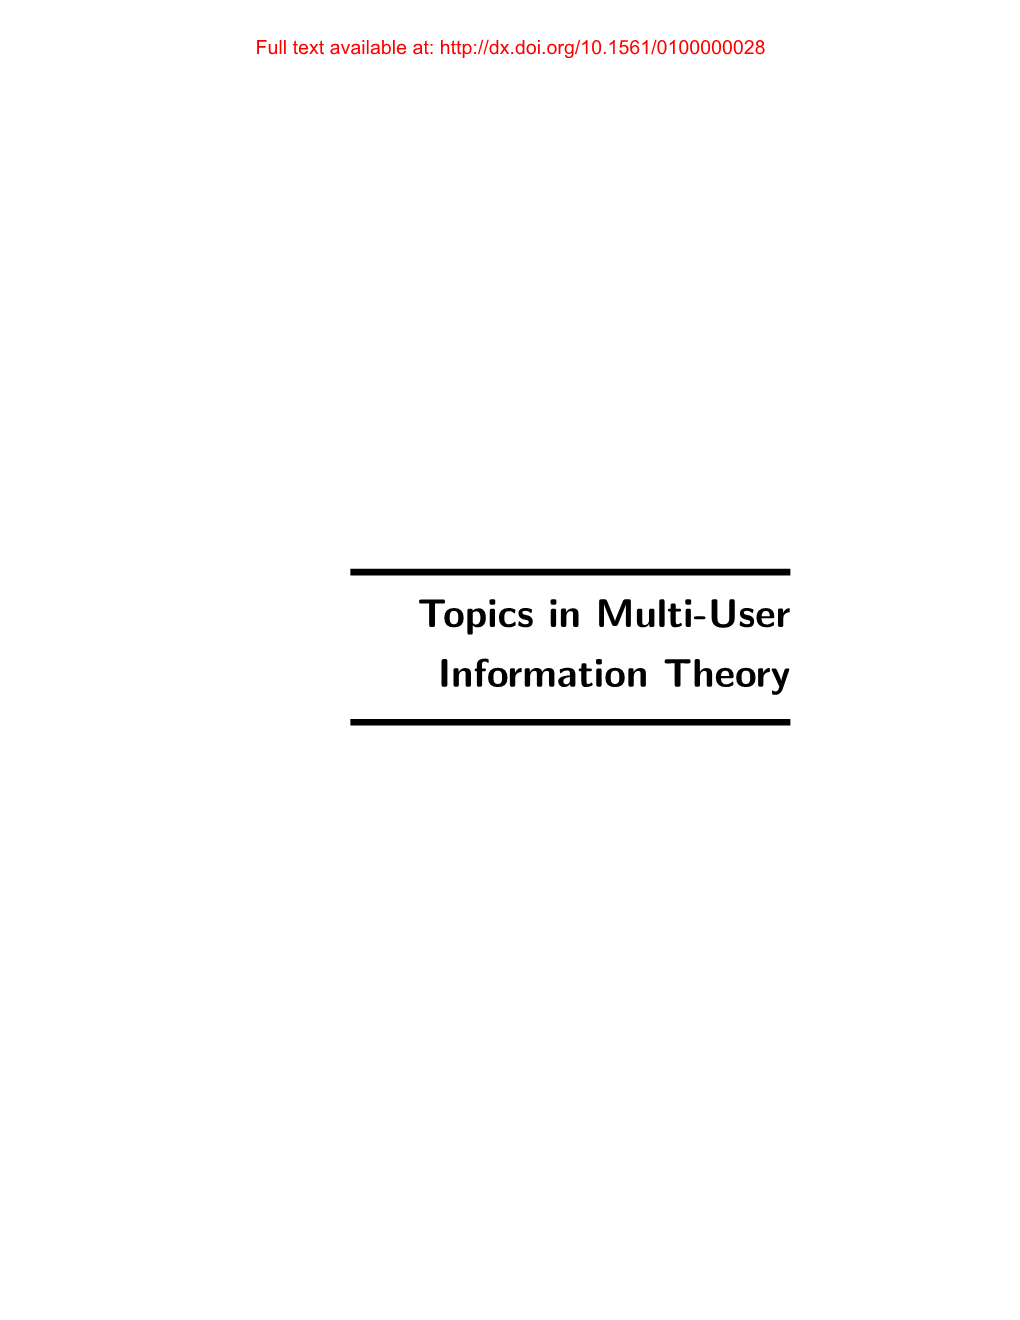 Topics in Multi-User Information Theory Full Text Available At